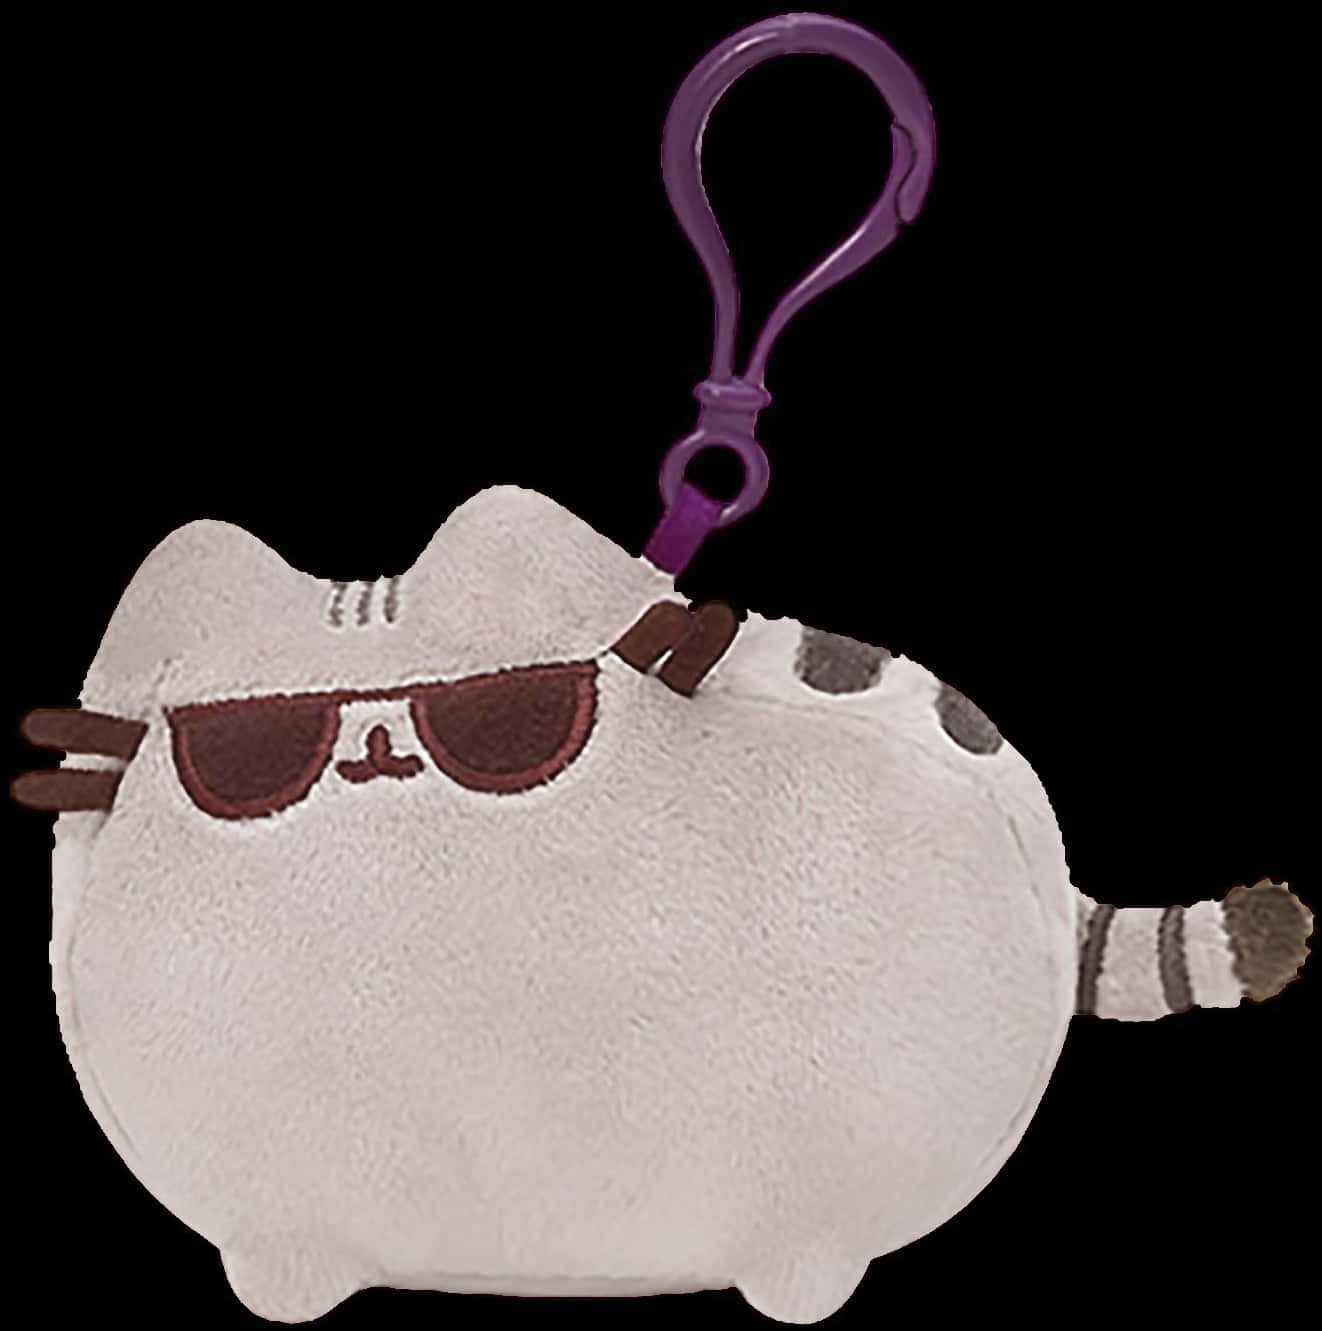 A Stuffed Animal With A Cat Face PNG